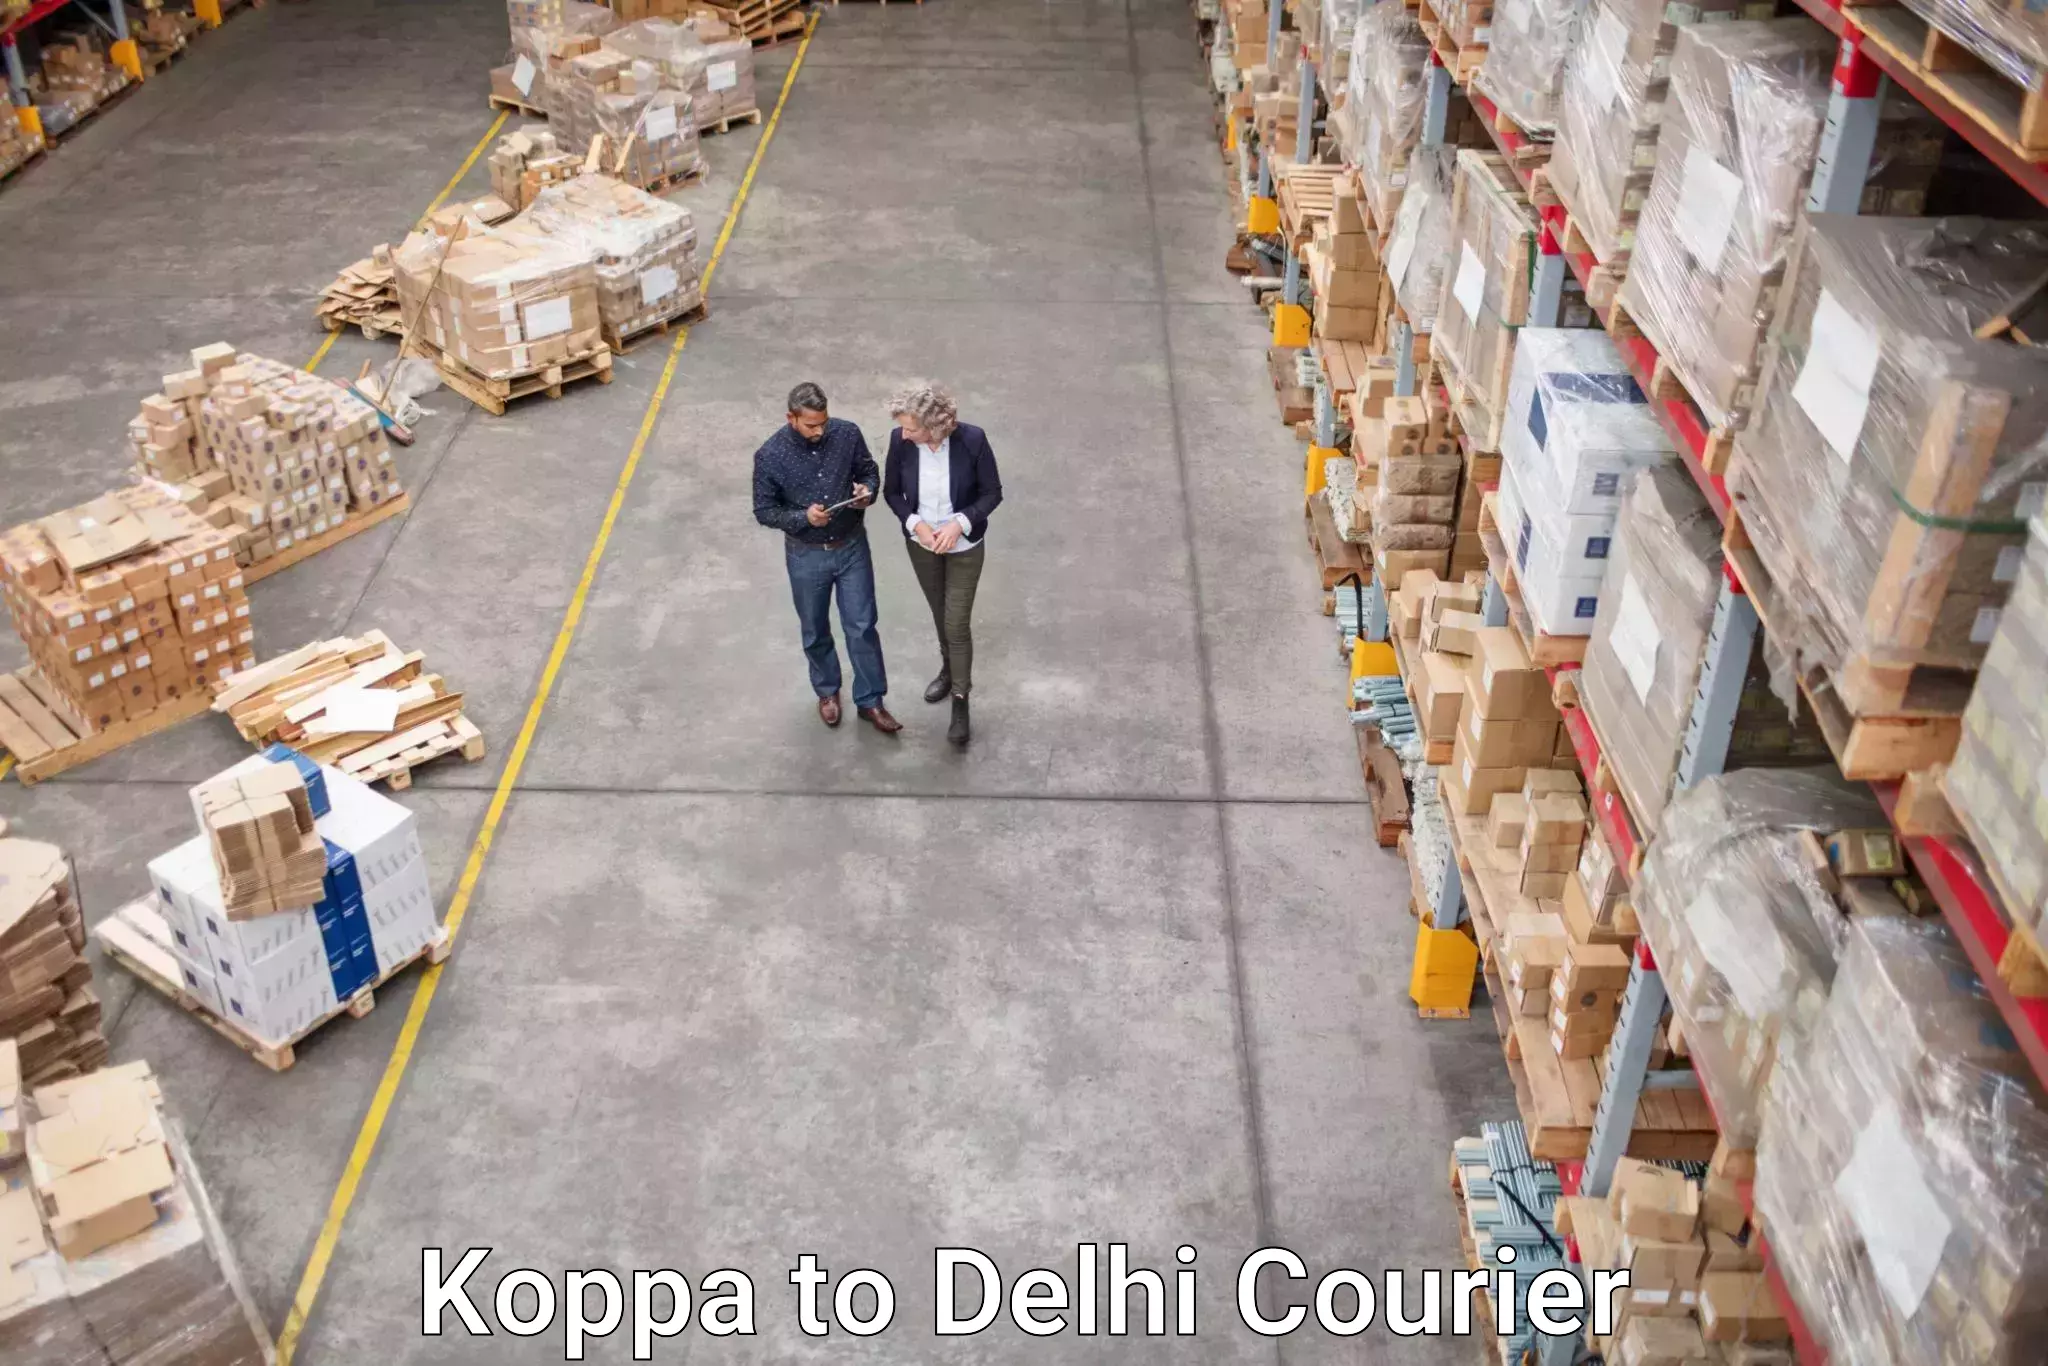 Courier service comparison Koppa to NCR